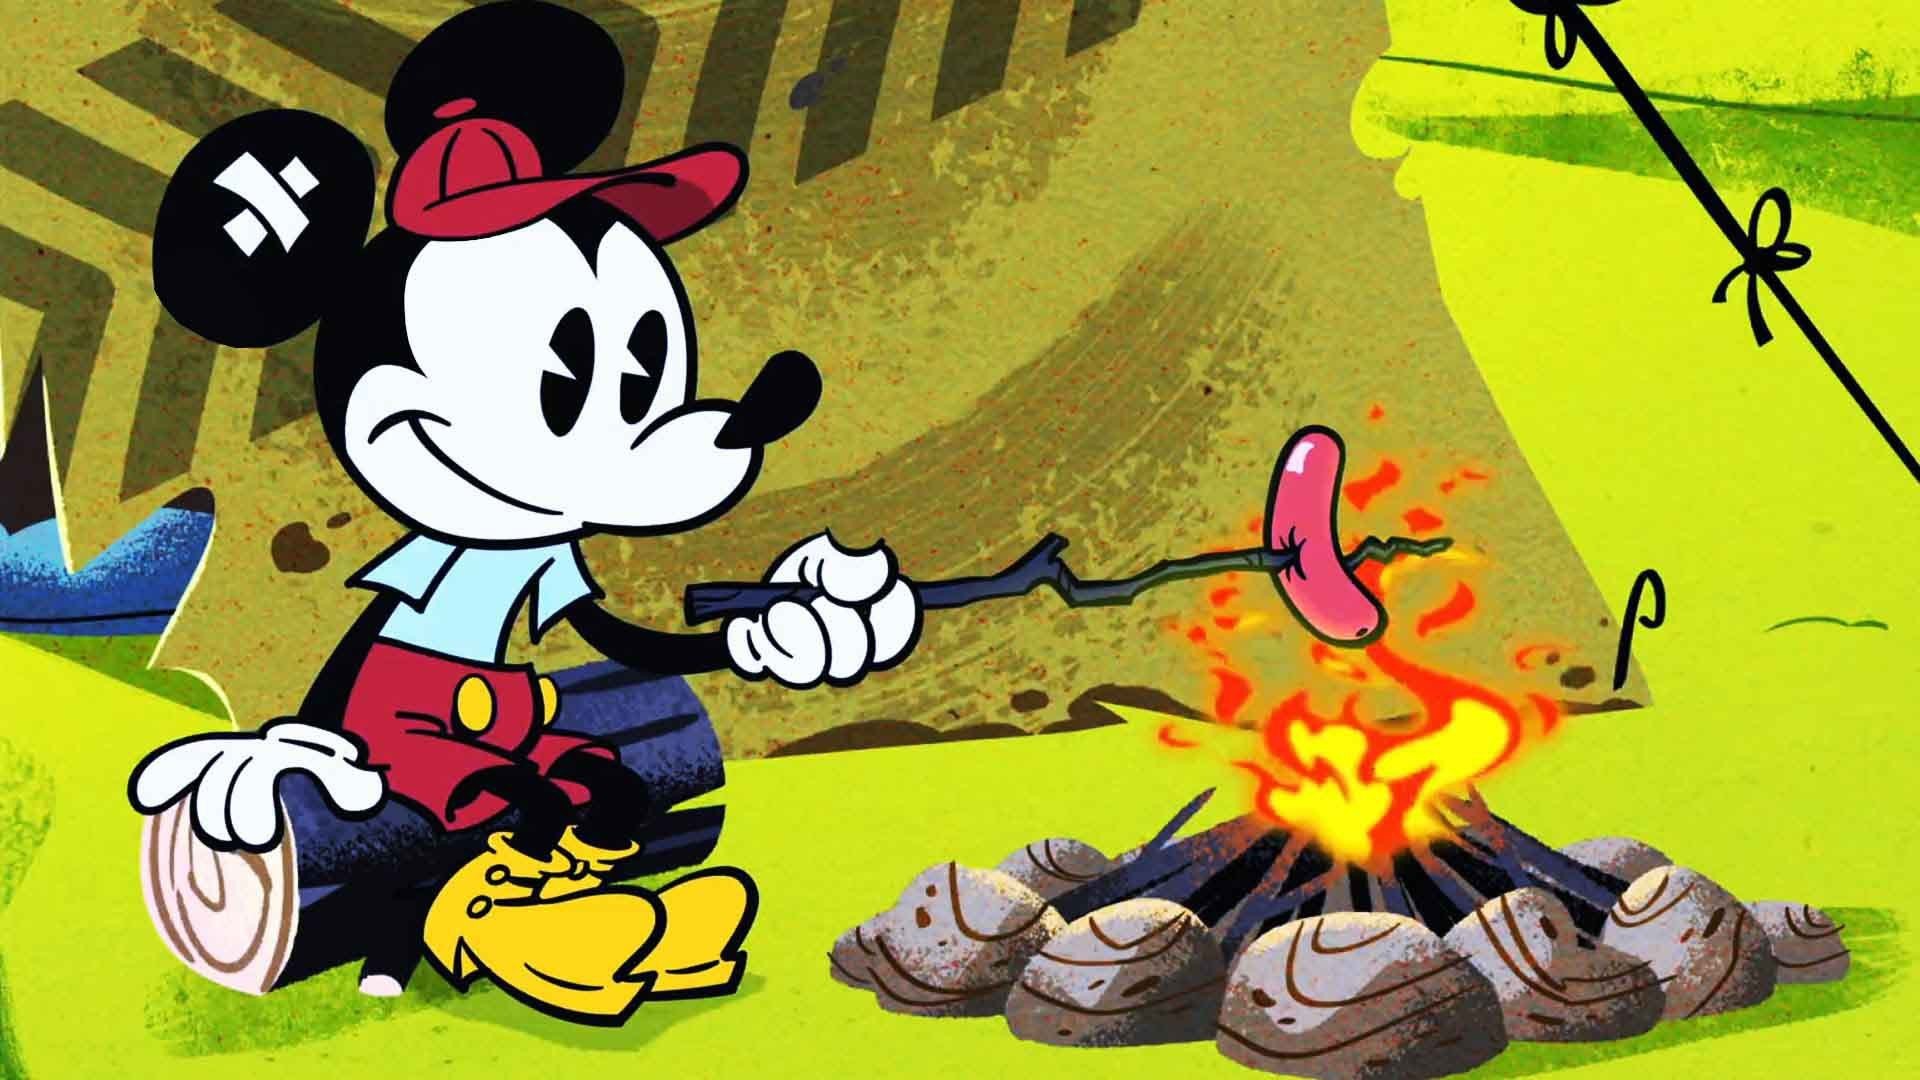 Free Download Mickey Mouse Image 1920x1080 Kb Wallpaper 1920x1080